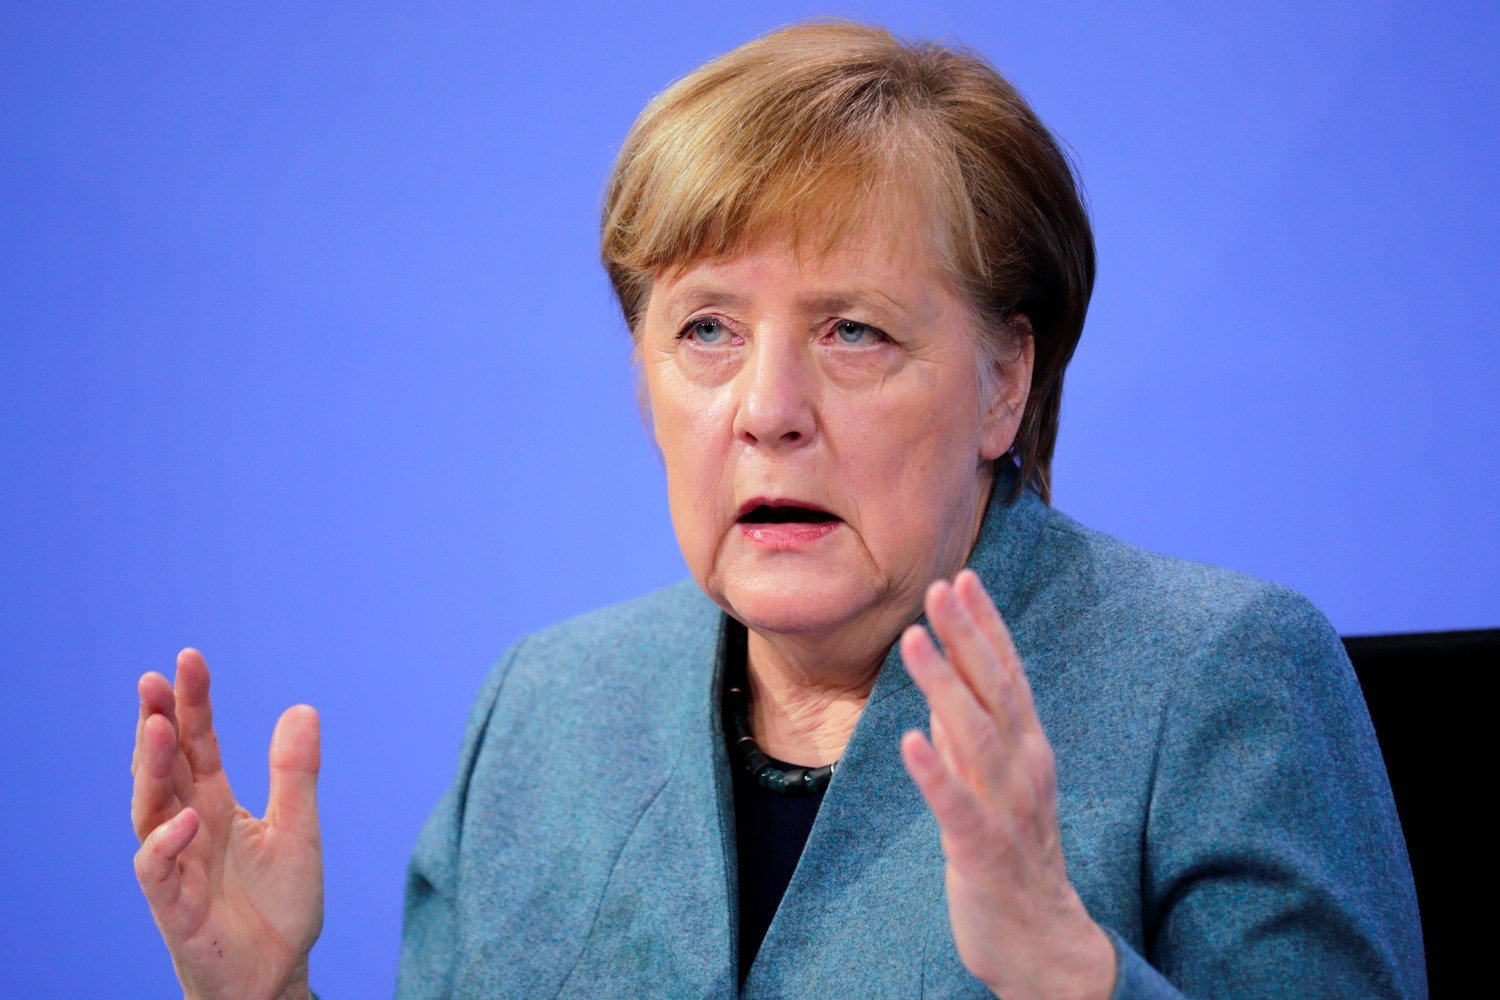 Merkel to give rare unscheduled TV interview on Germany's Covid-19 situation